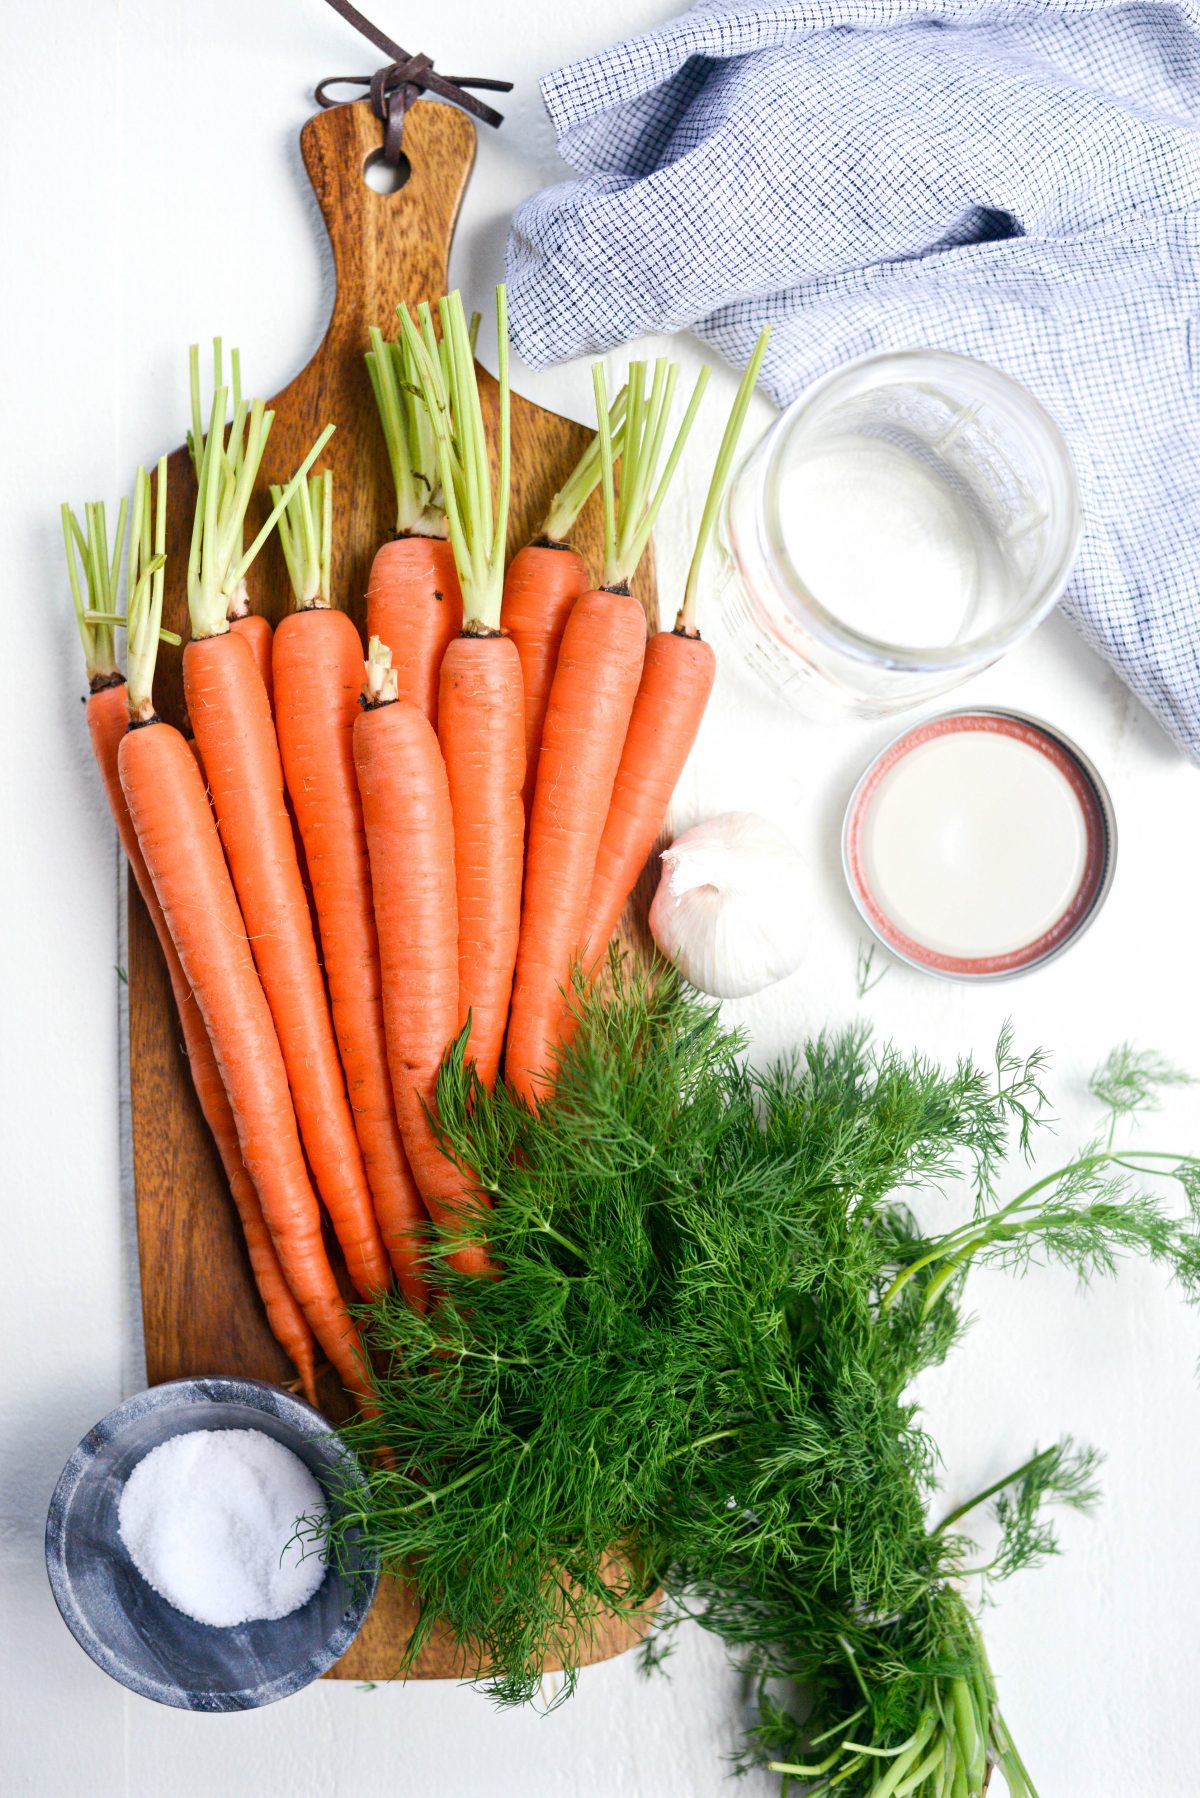 ingredients for Naturally Fermented Dilly Carrots